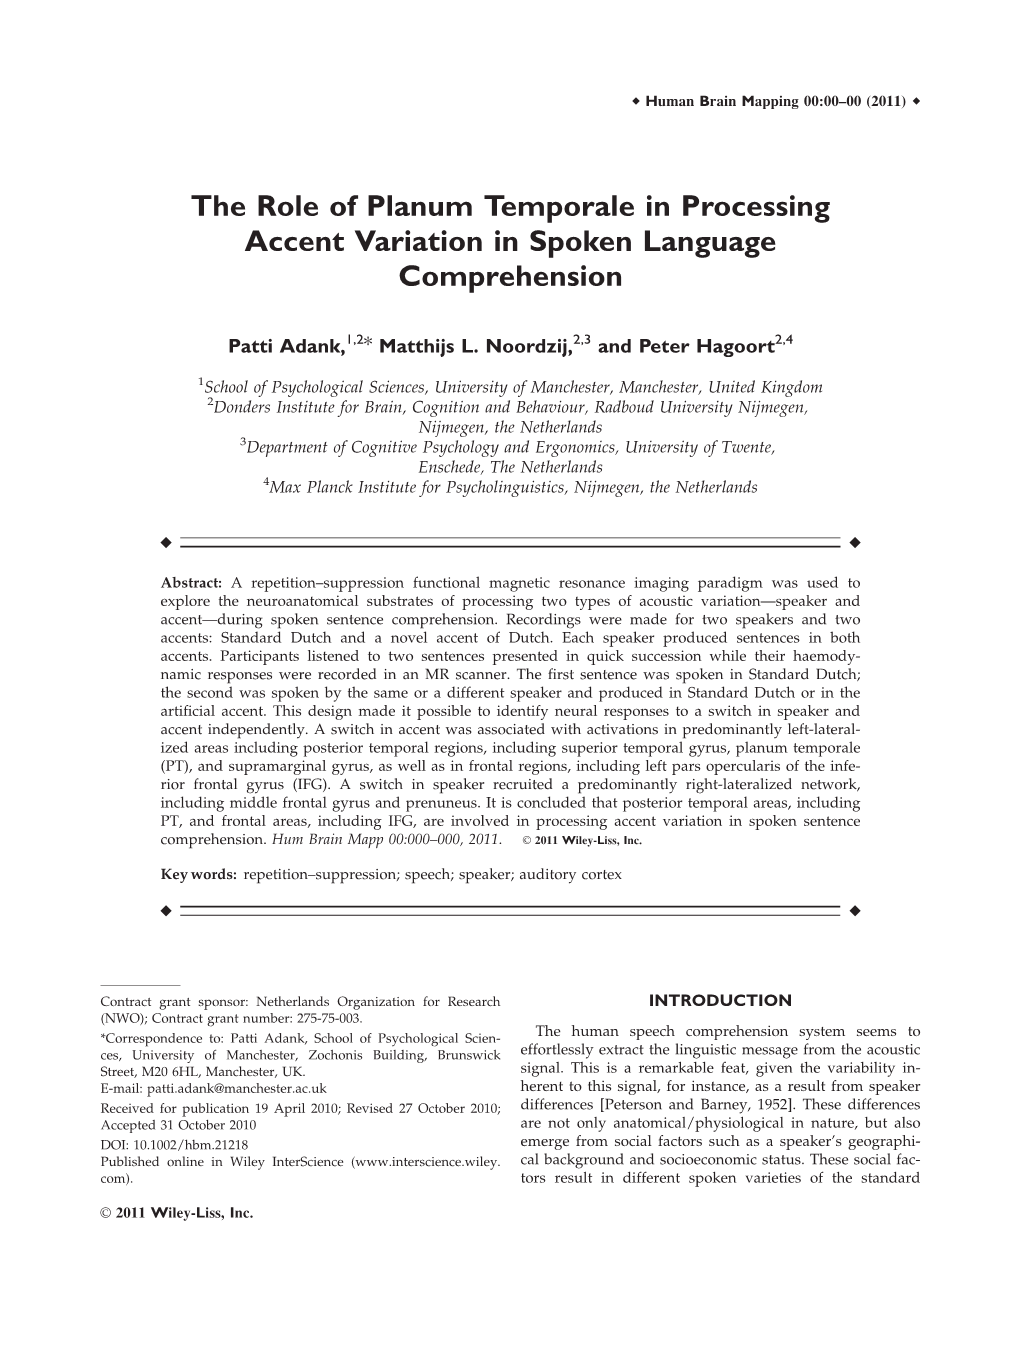 The Role of Planum Temporale in Processing Accent Variation in Spoken Language Comprehension